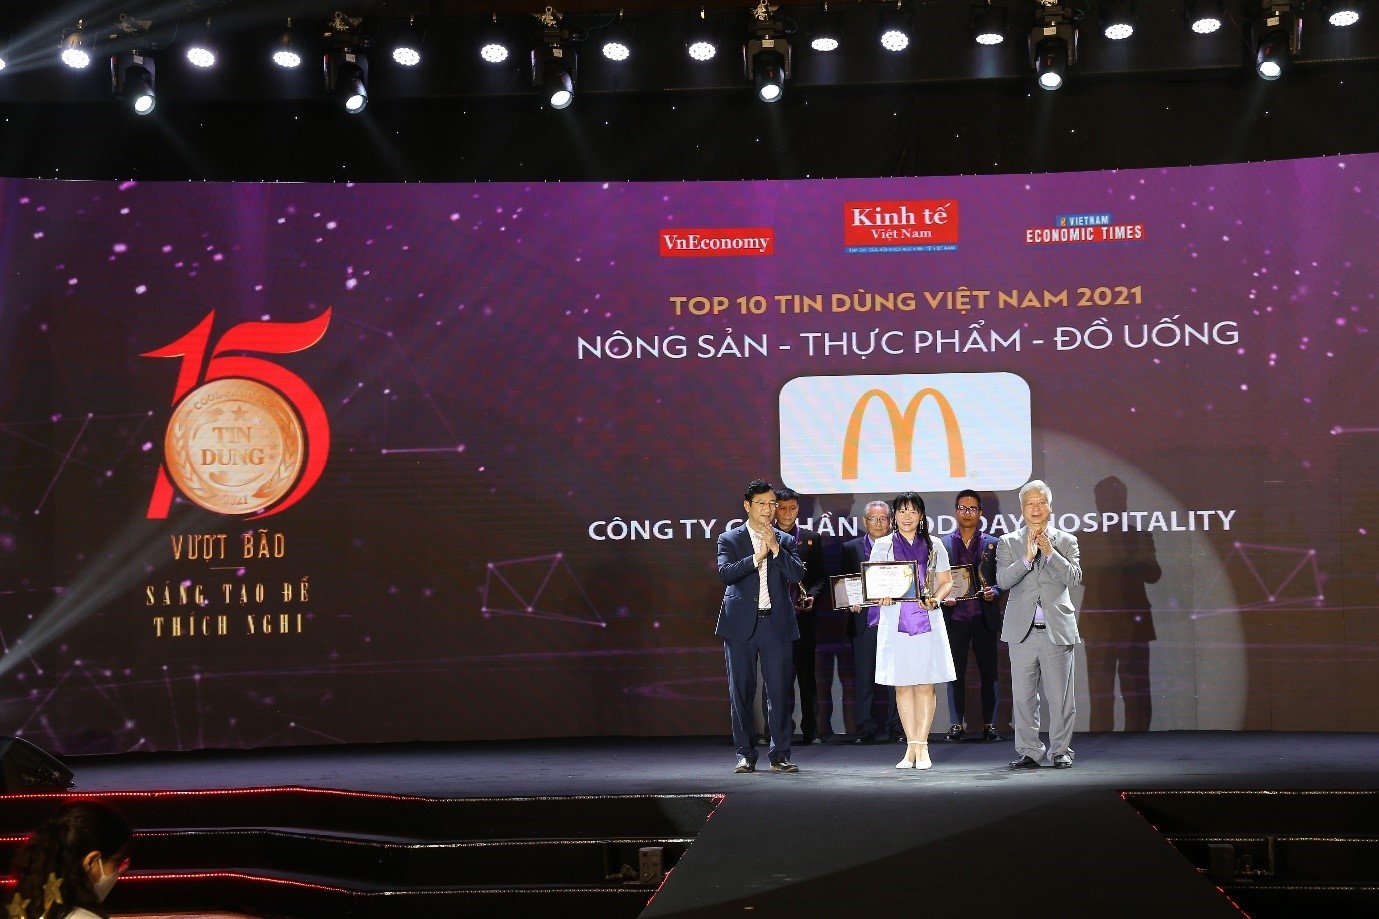 McDonald's among Top 10 Most Trustworthy Companies in the services industry in 2021